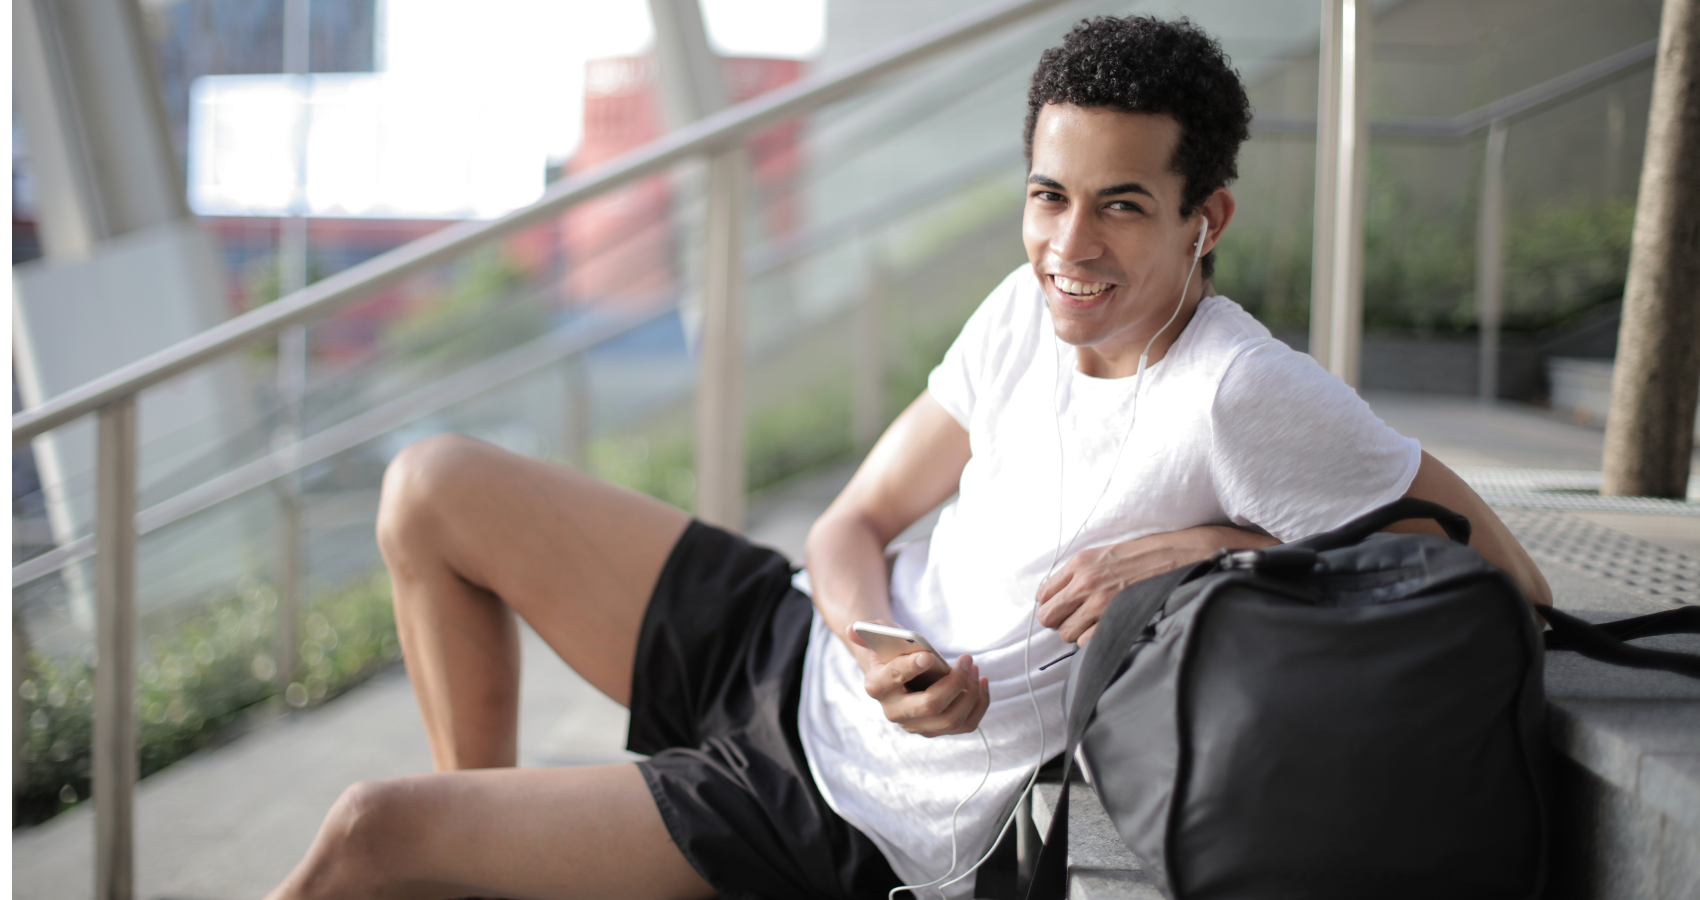 A man sitting there and wearing shorts